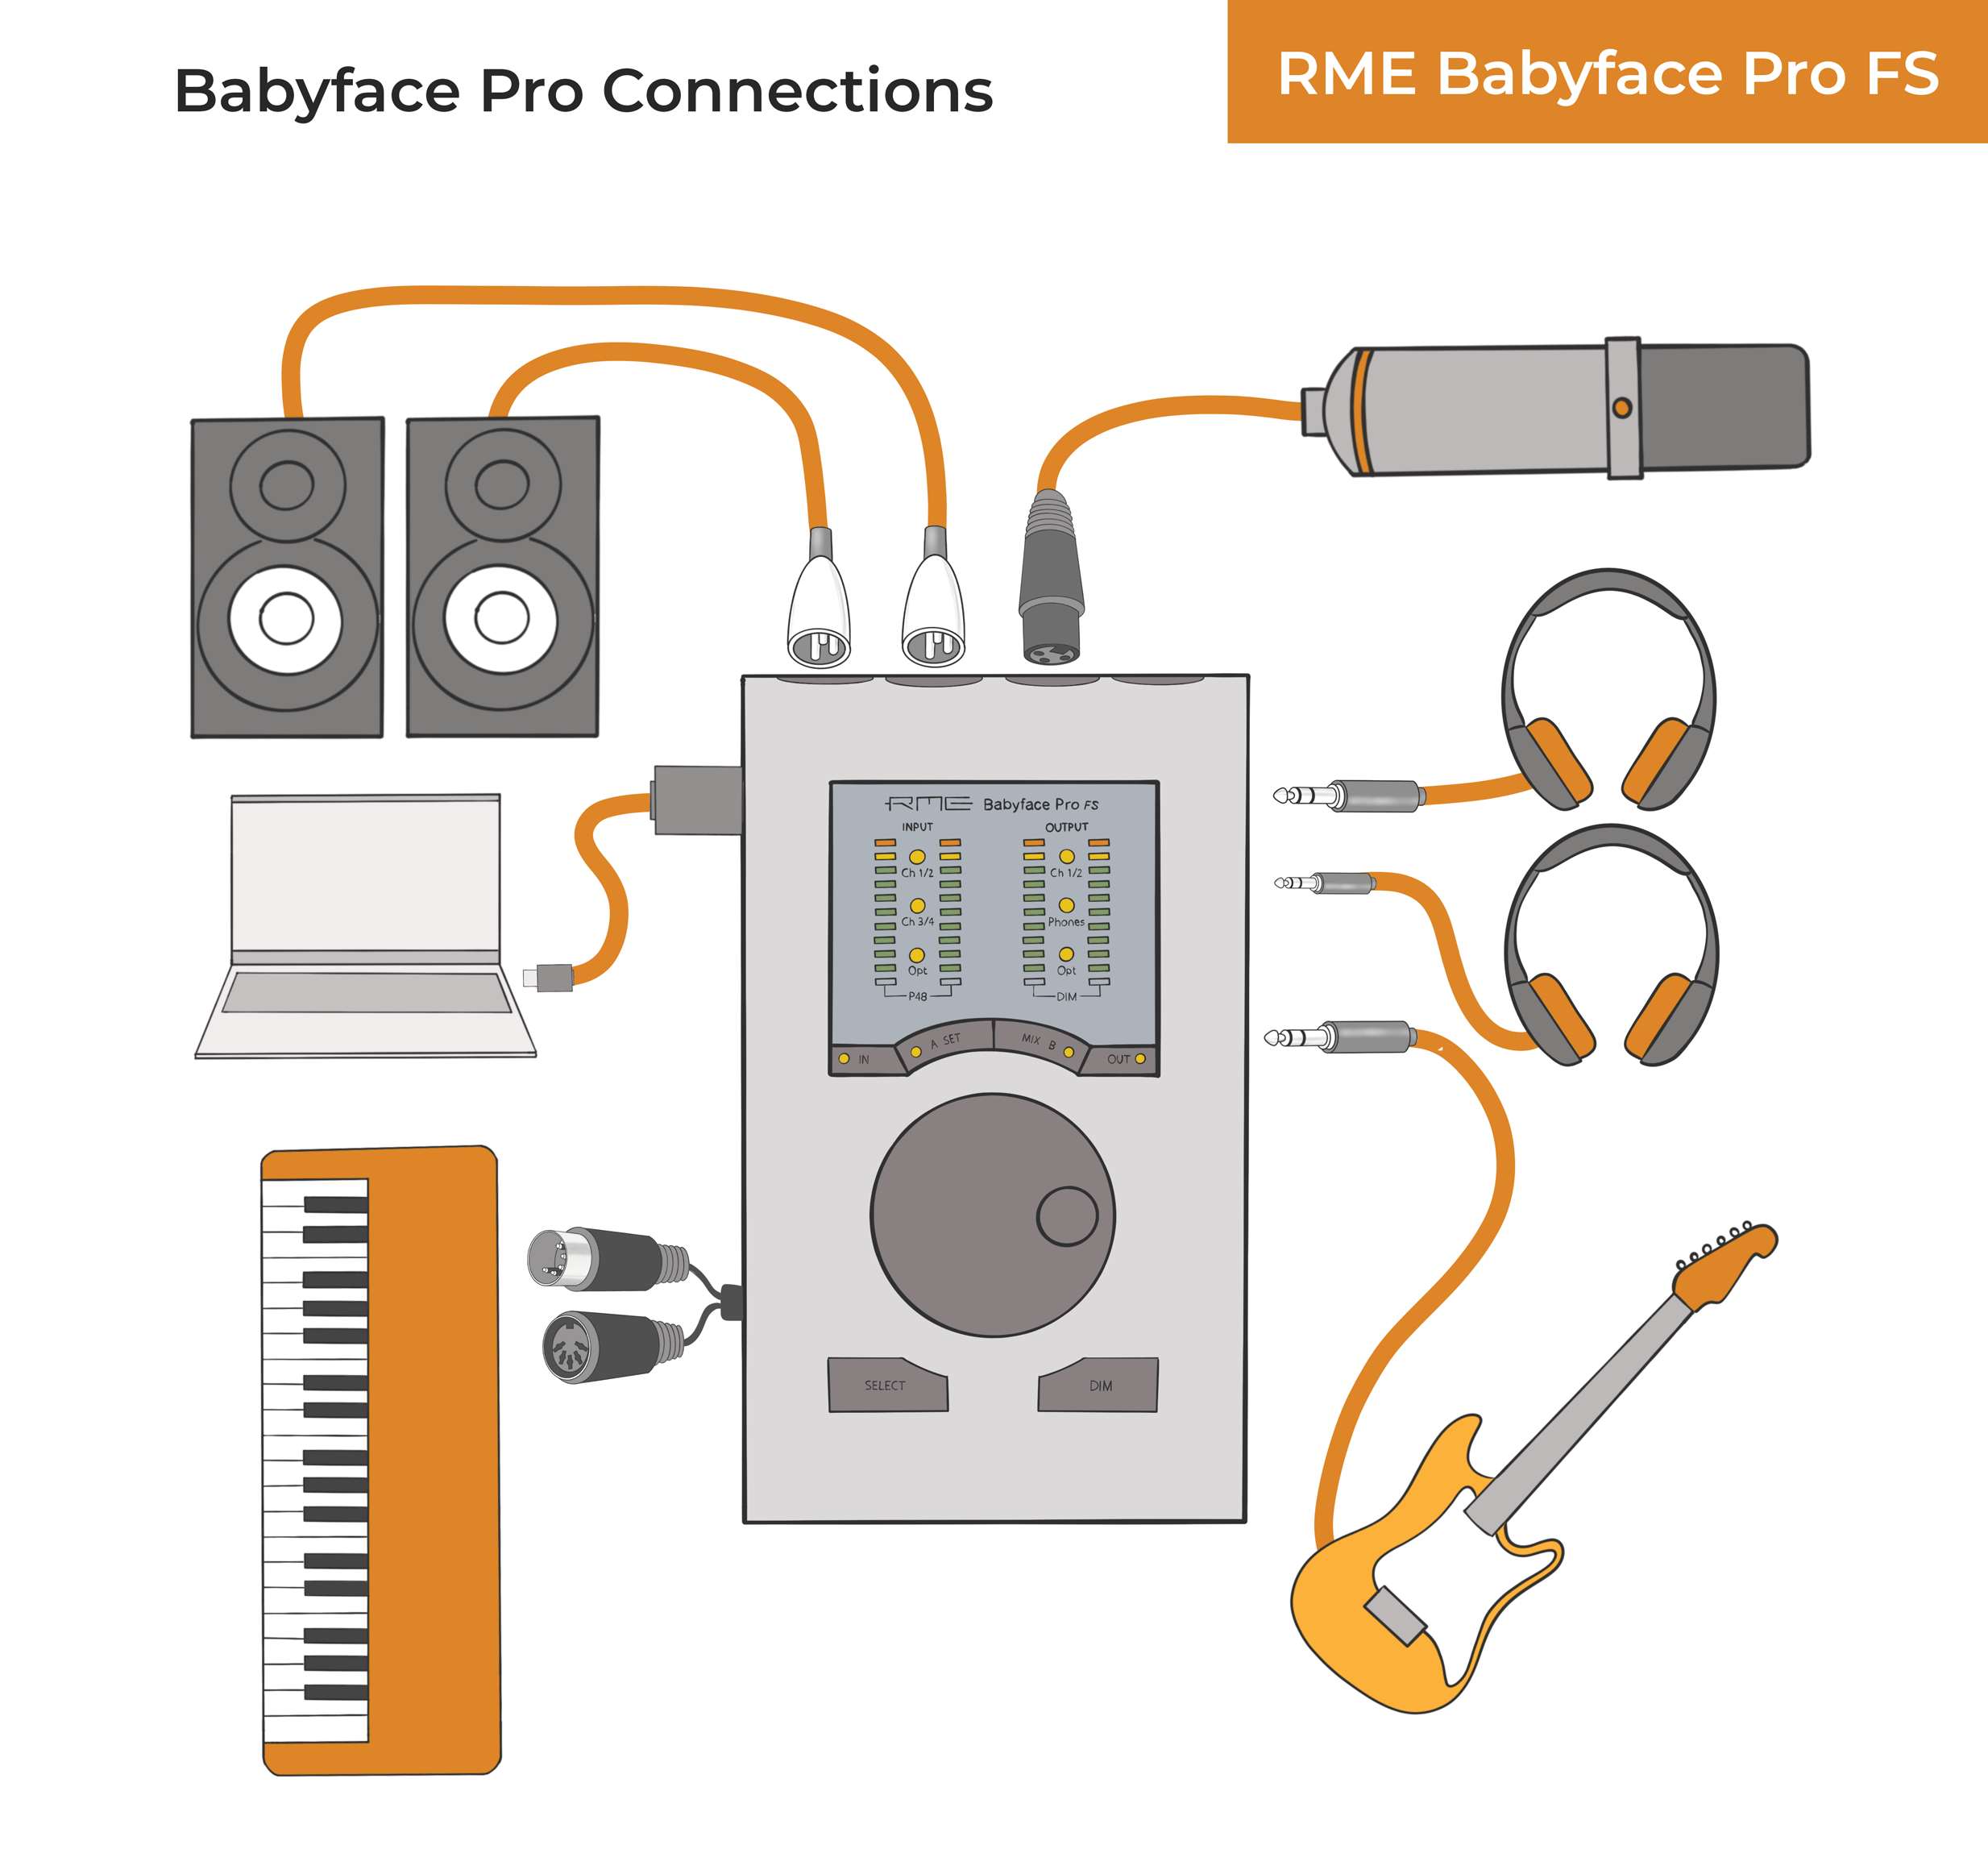 How to connect audio equipment to the Babyface Pro FS